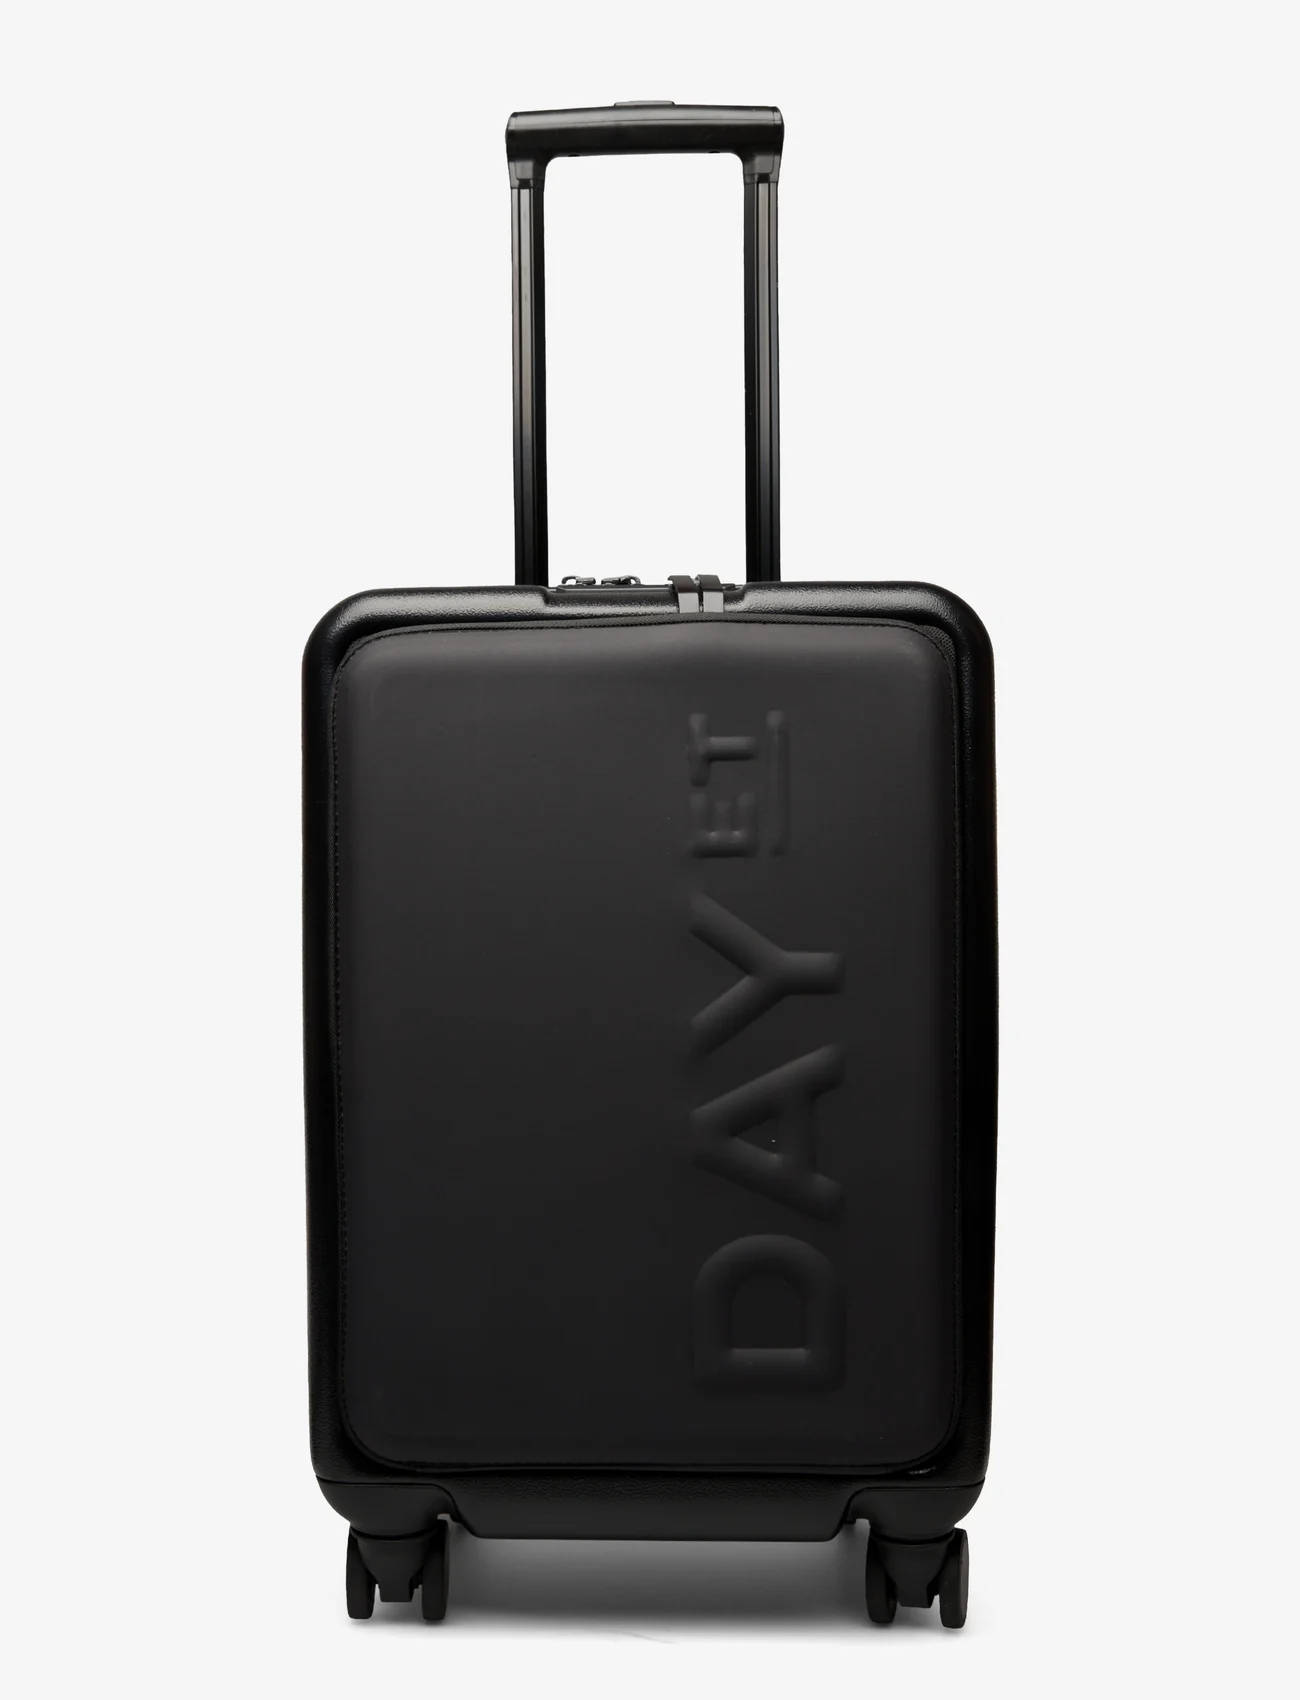 DAY ET - Day CPH 20" Suitcase Onboard - kohvrid - black - 0